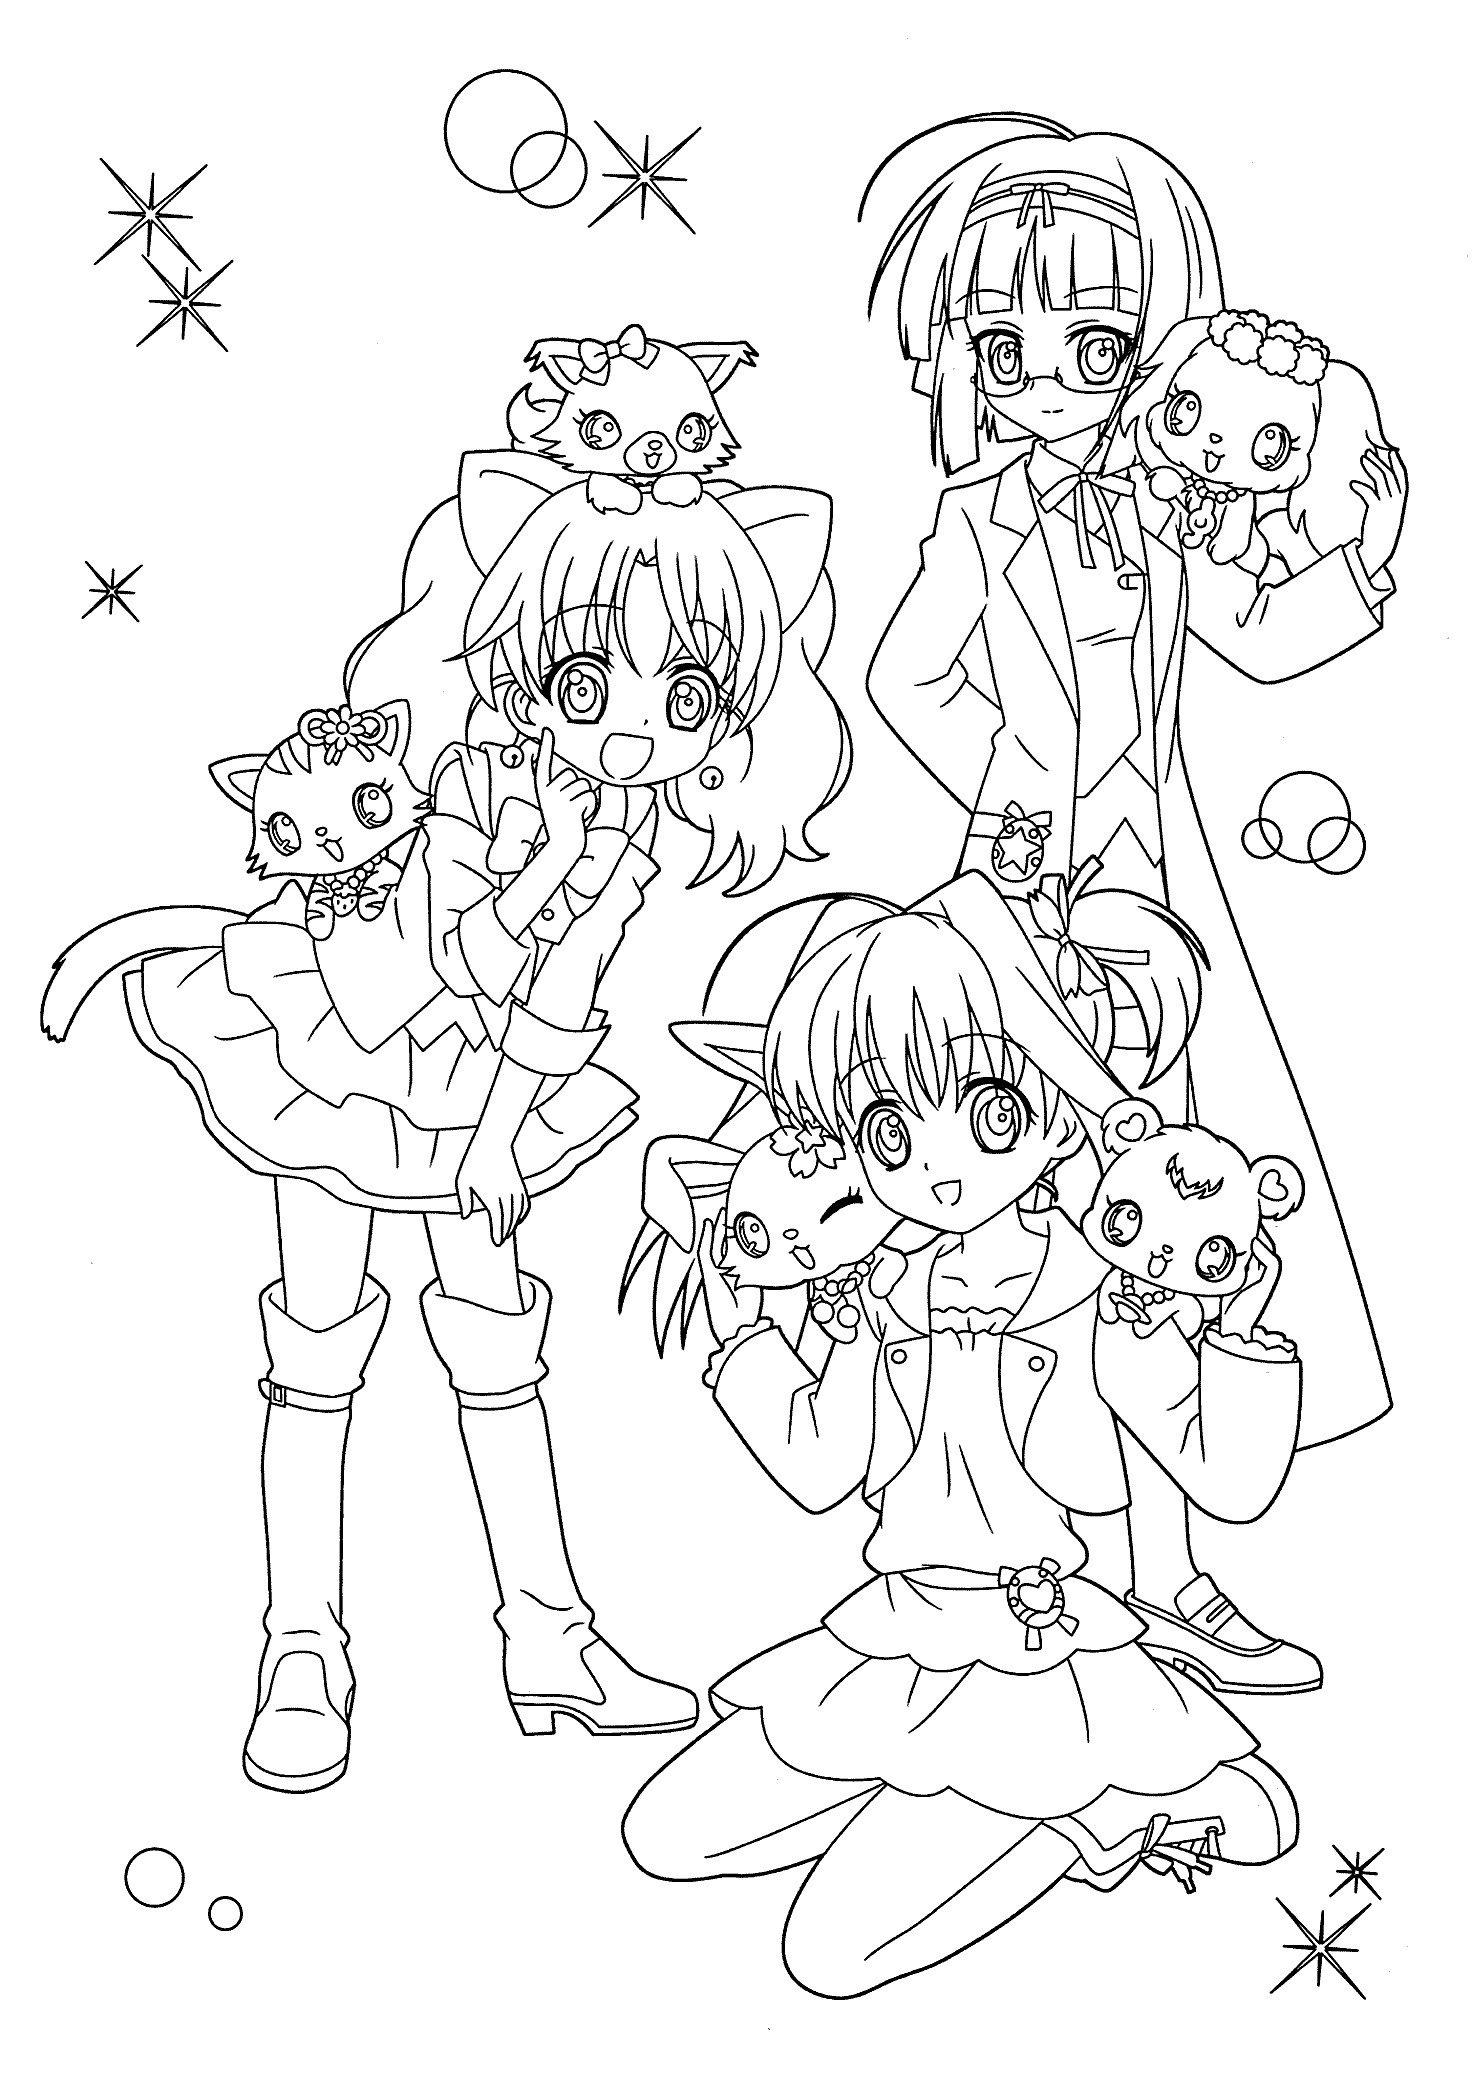 25 ideas for cute anime girls coloring pages home family style and ...